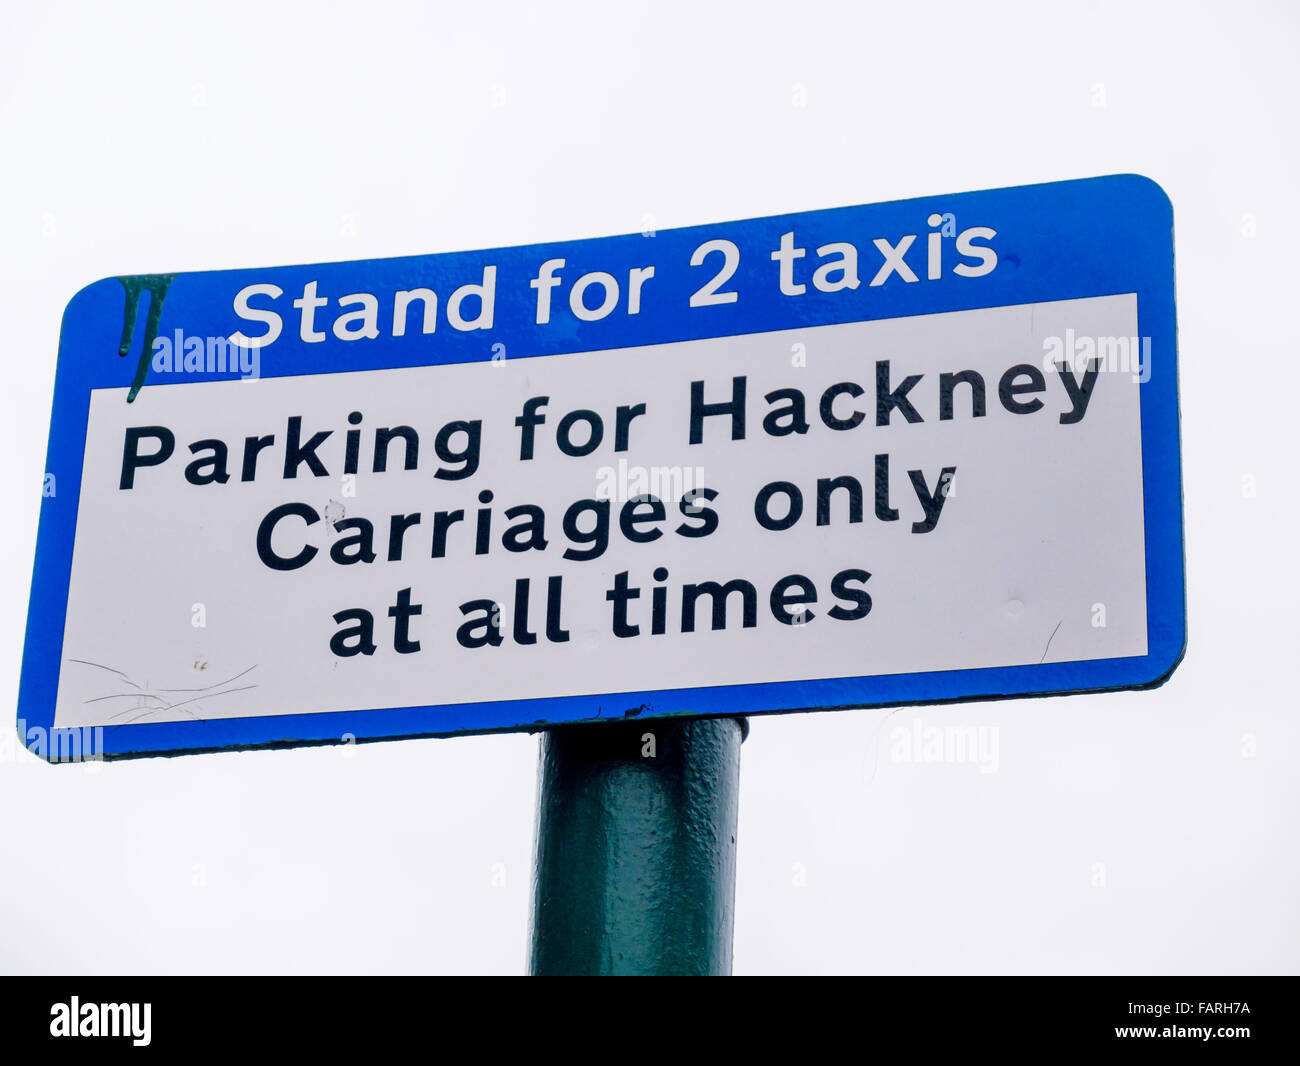 Taxi Stand sign two taxis Parking for Hackney Carriages only at all times Stock Photo